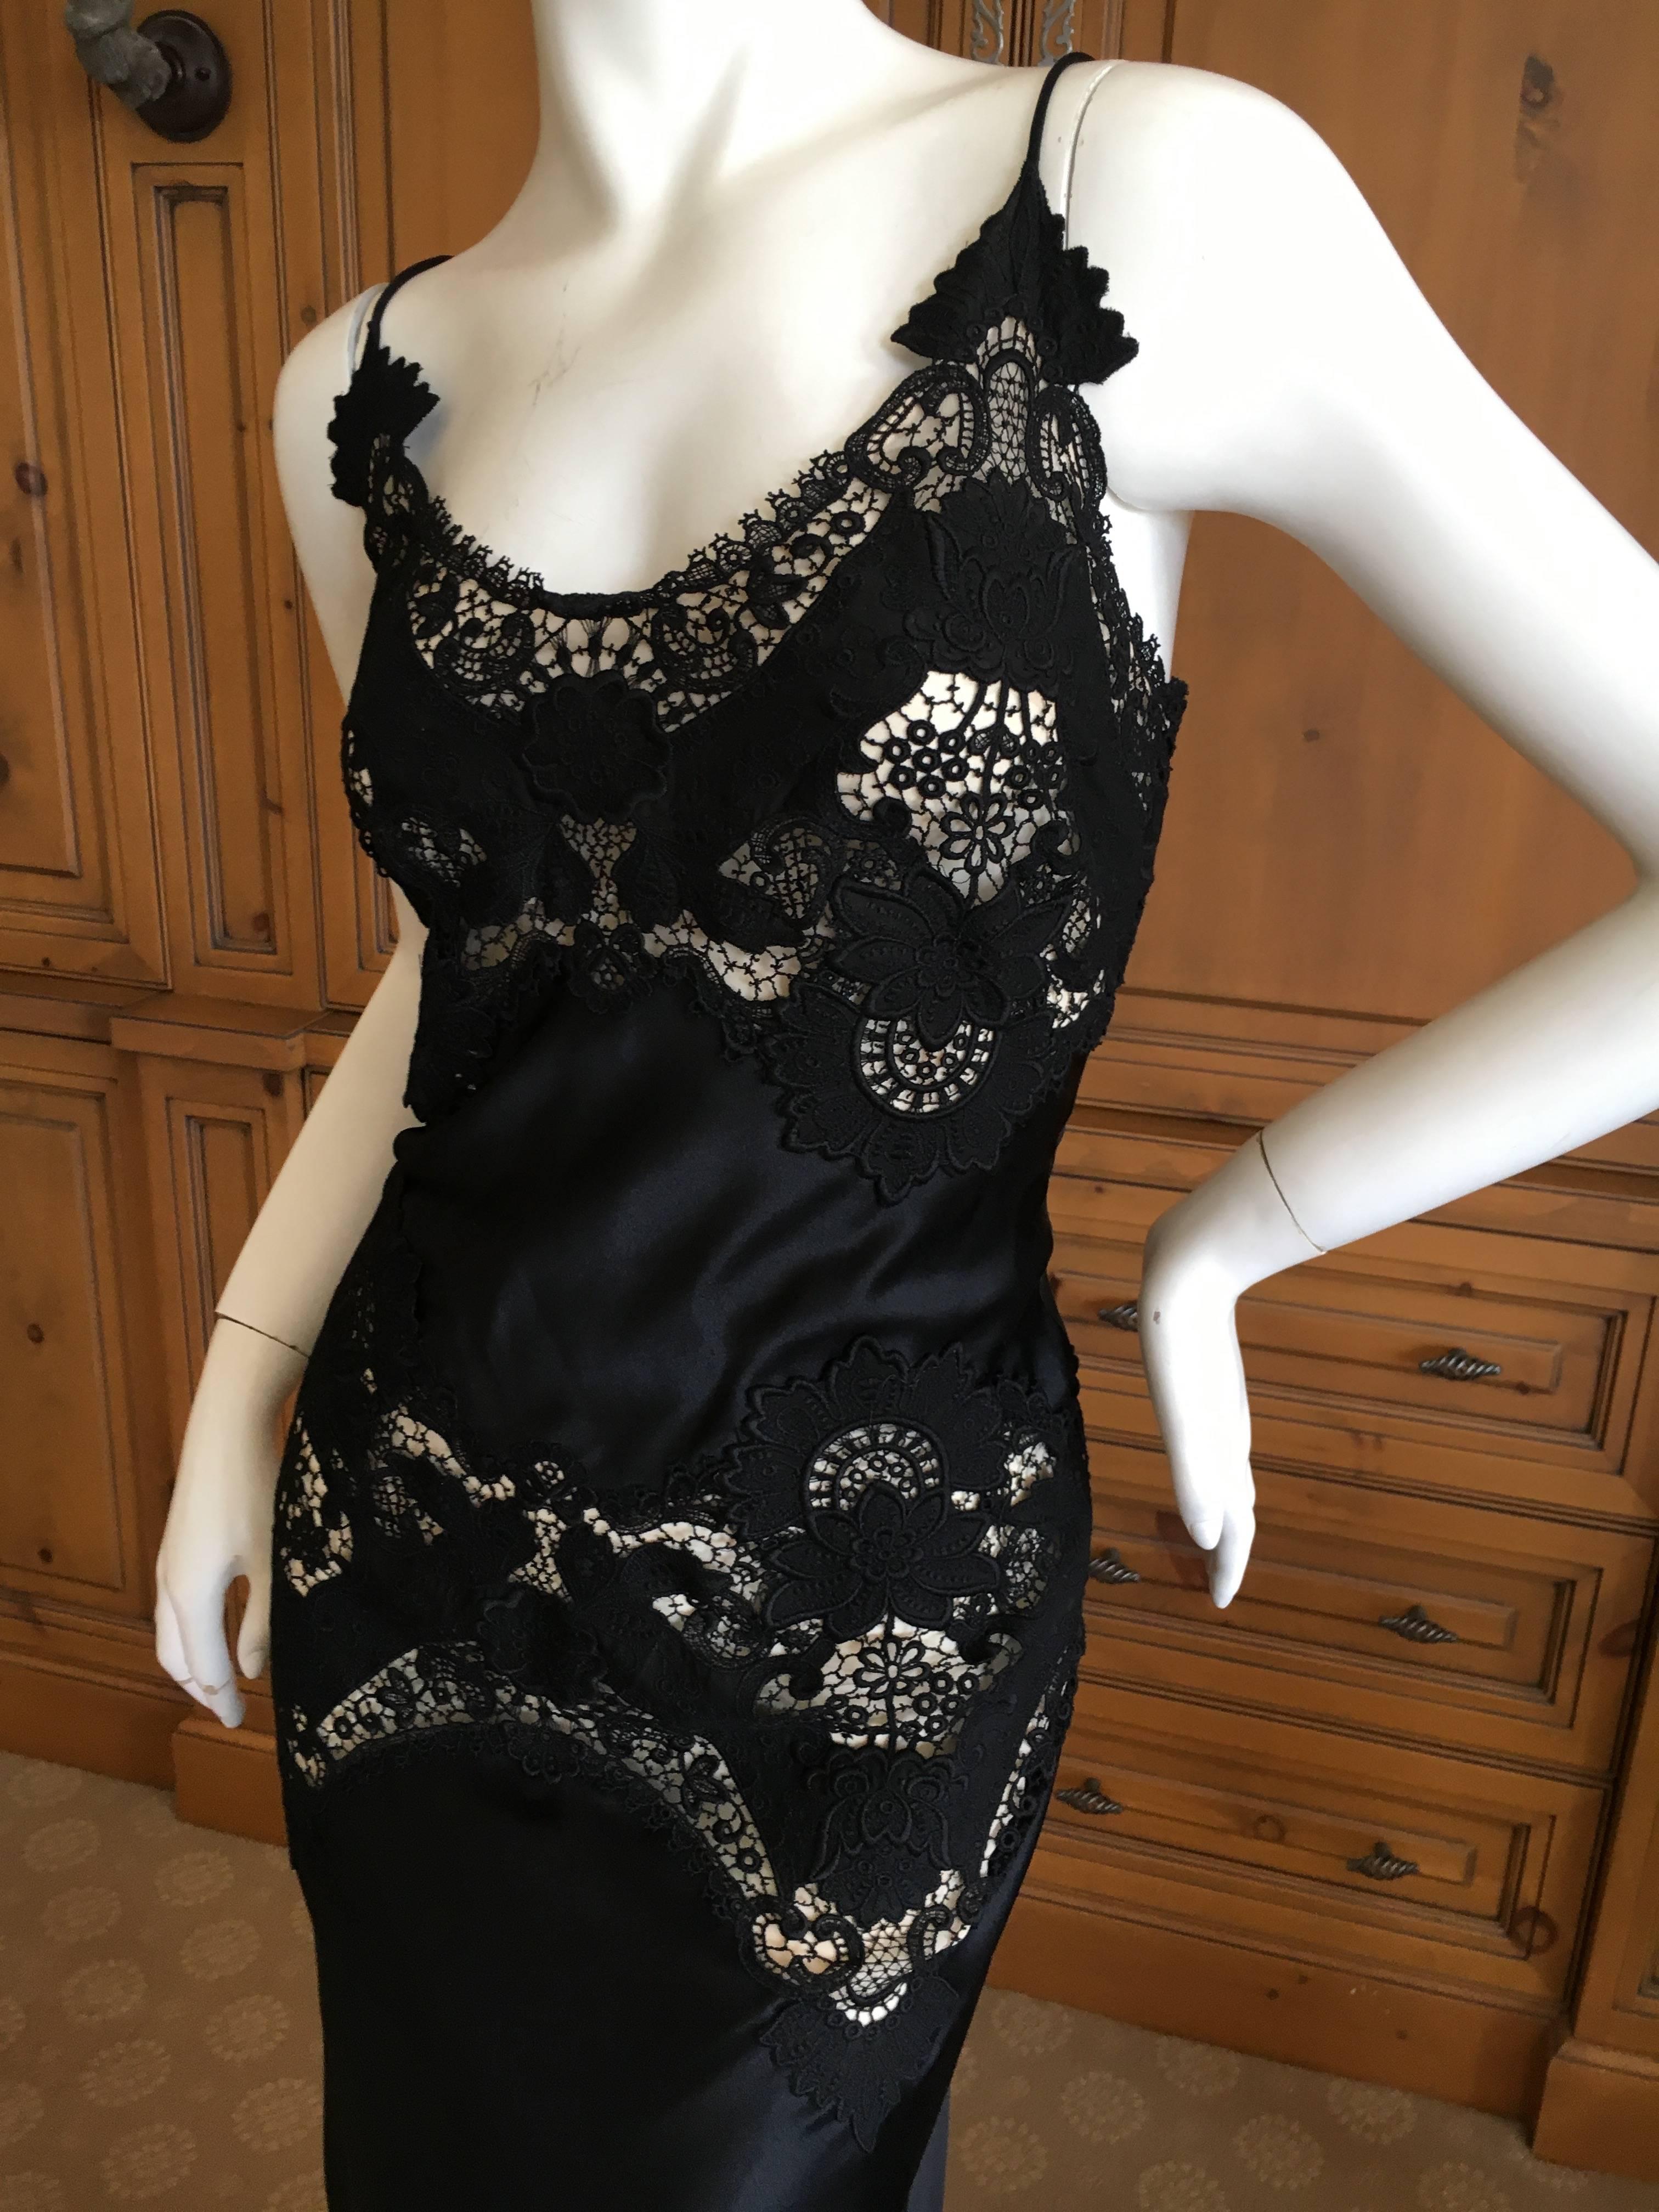 Alexander McQueen Black Evening Dress with Sheer Guipure Lace Details 2004 Sz 46 For Sale 1